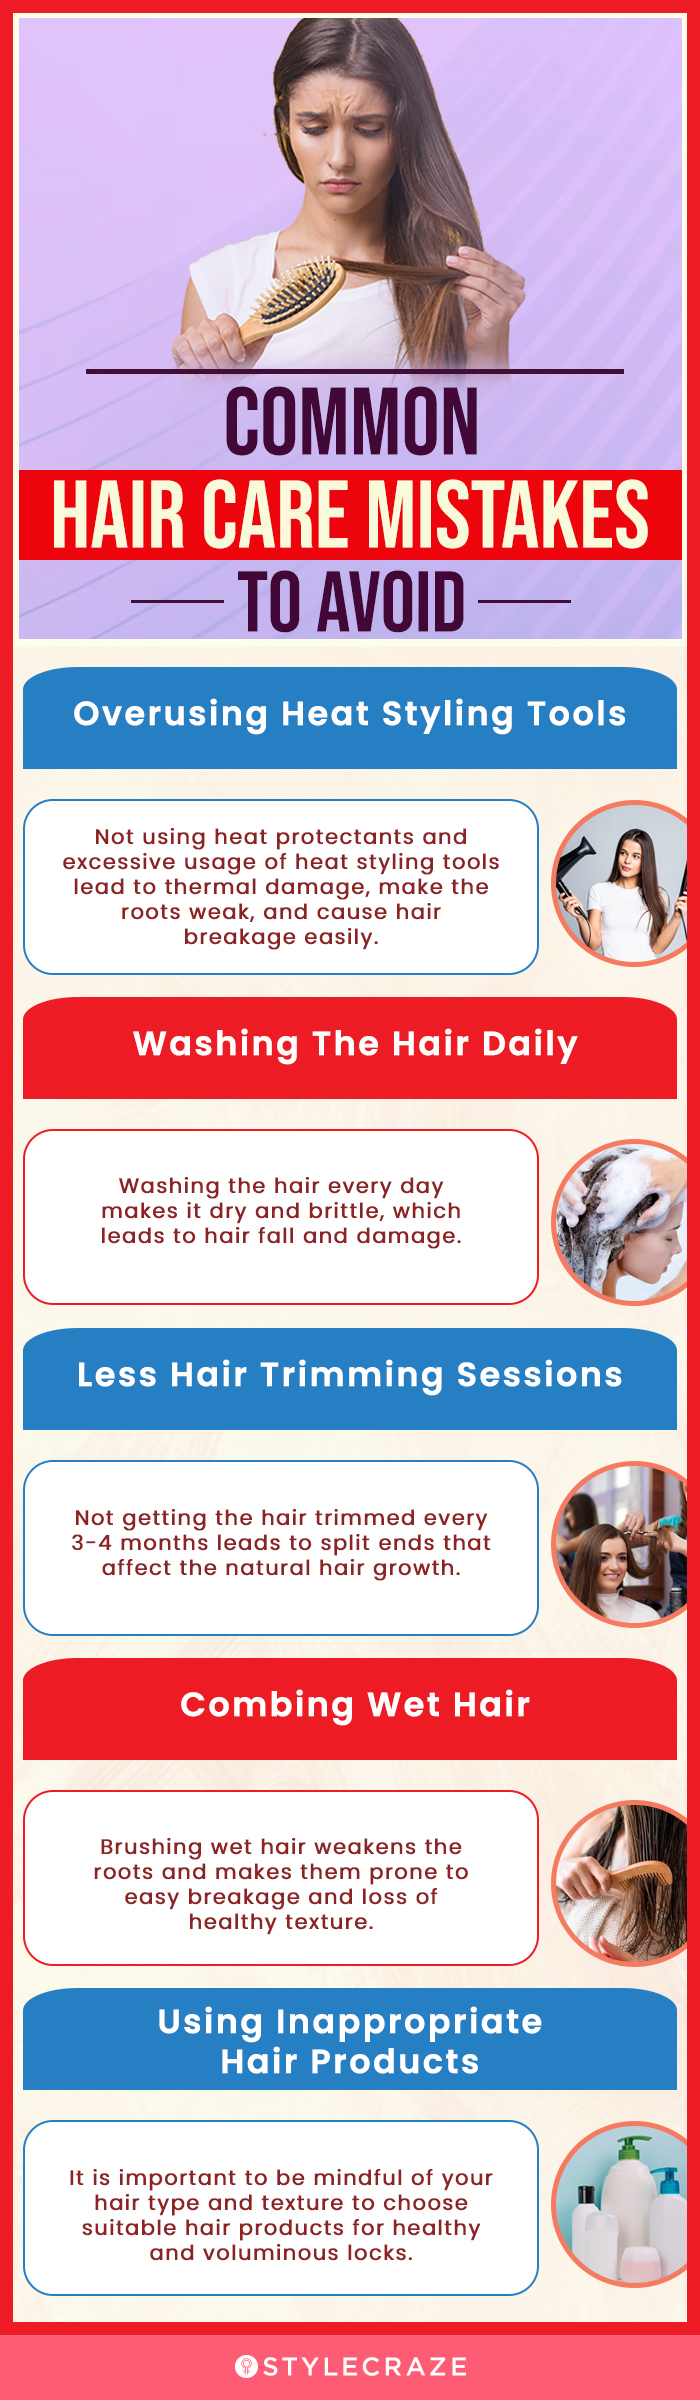 Common Hair Care Mistakes To Avoid (infographic)